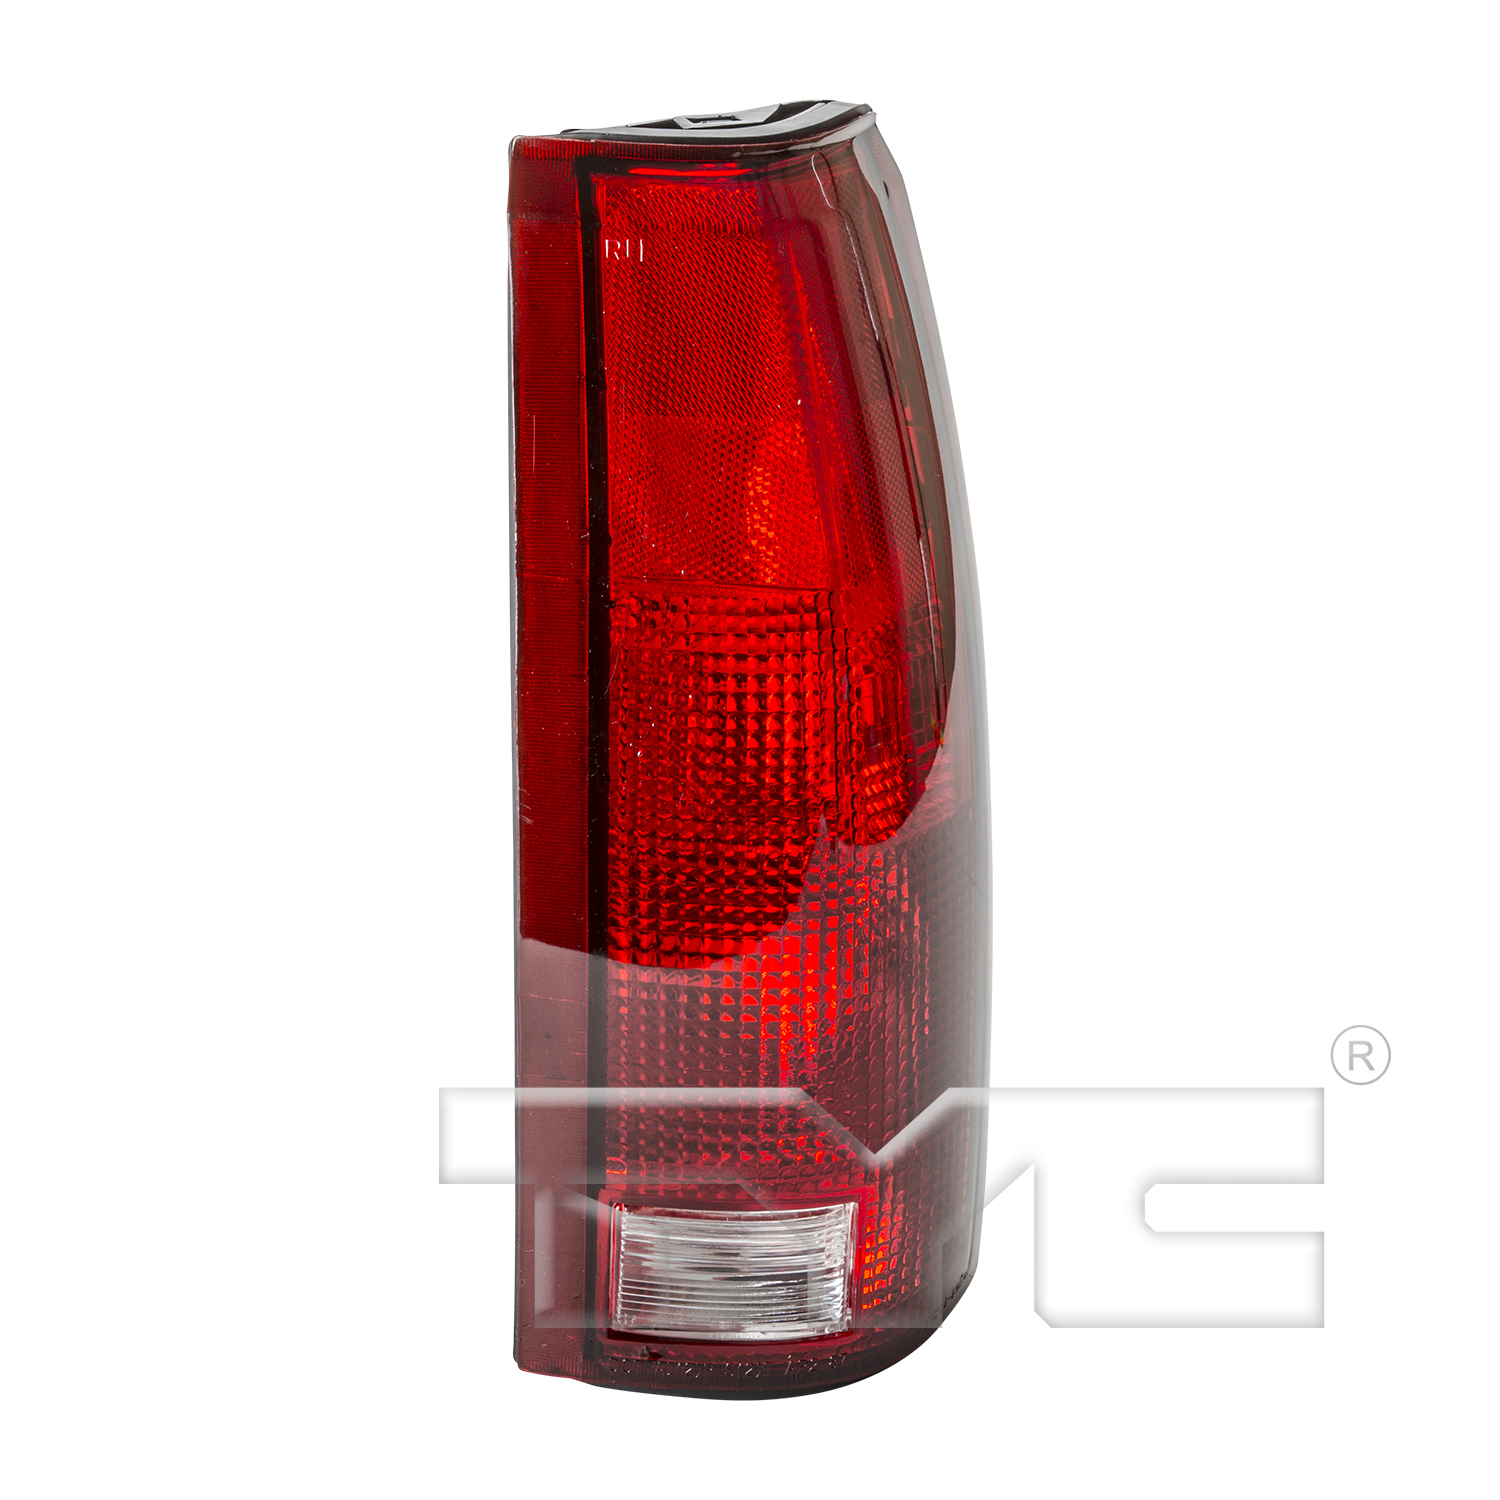 Aftermarket TAILLIGHTS for GMC - K2500, K2500,88-00,RT Taillamp lens